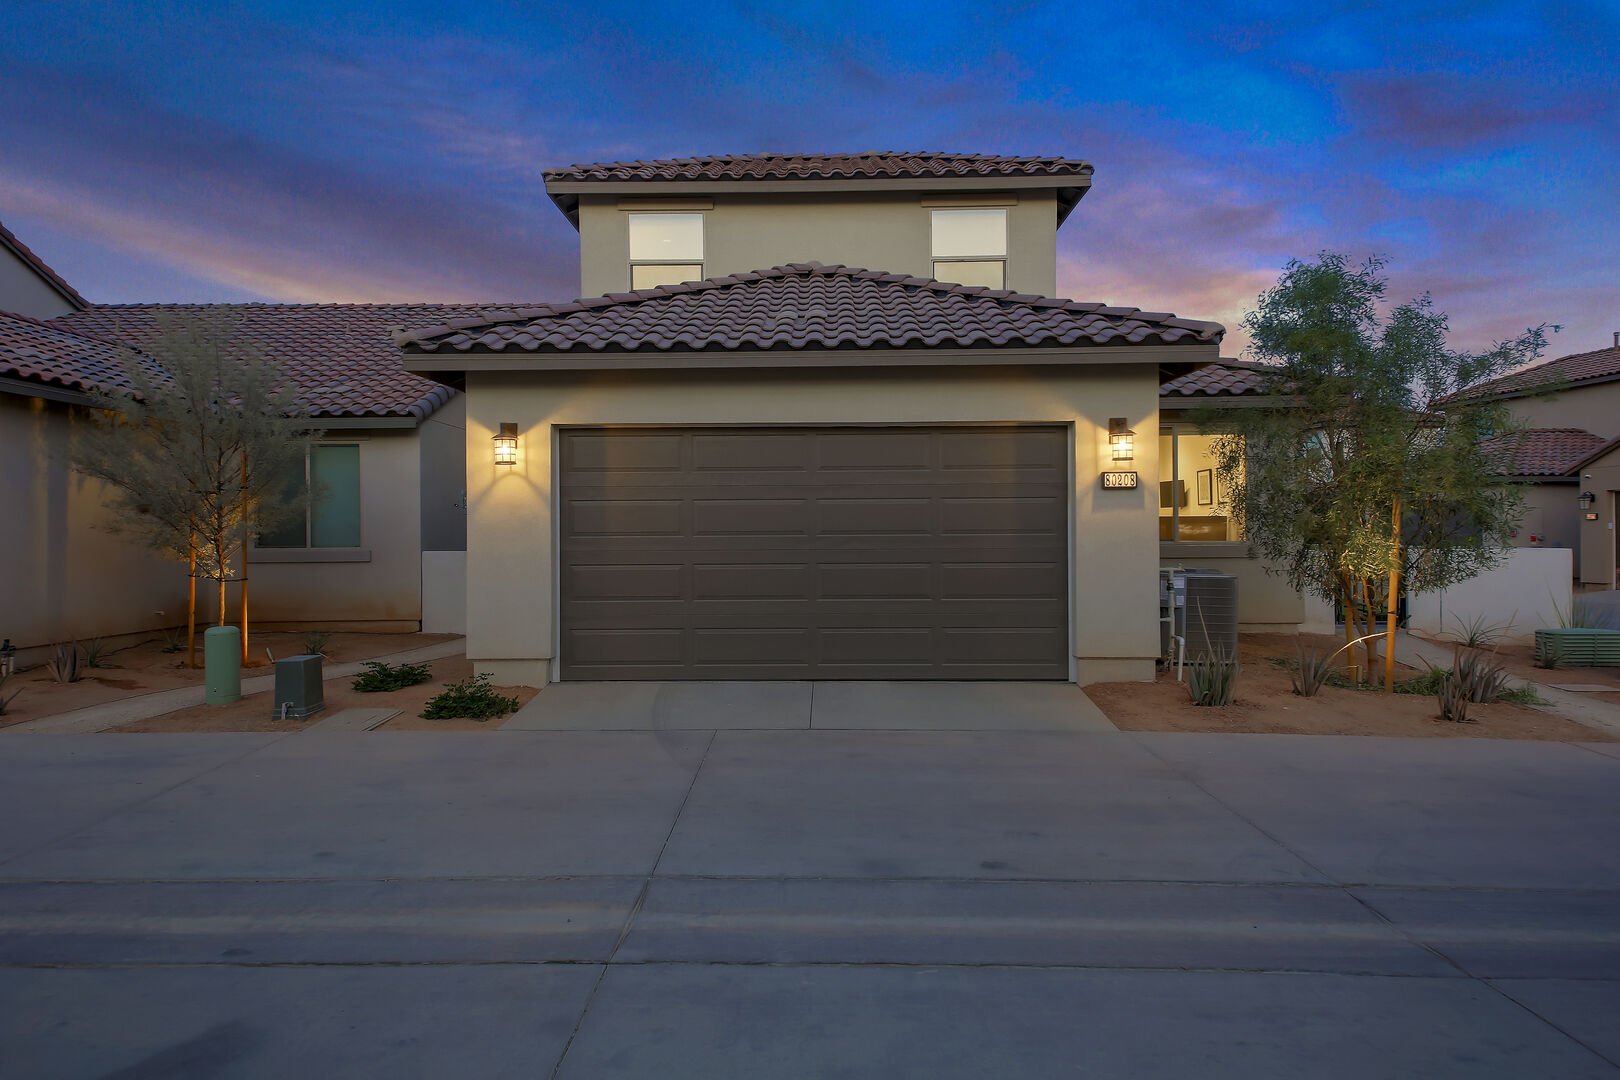 Desert Chic features parking for 4, which includes 1 in the garage, 2 in the driveway, and 1 on the street.